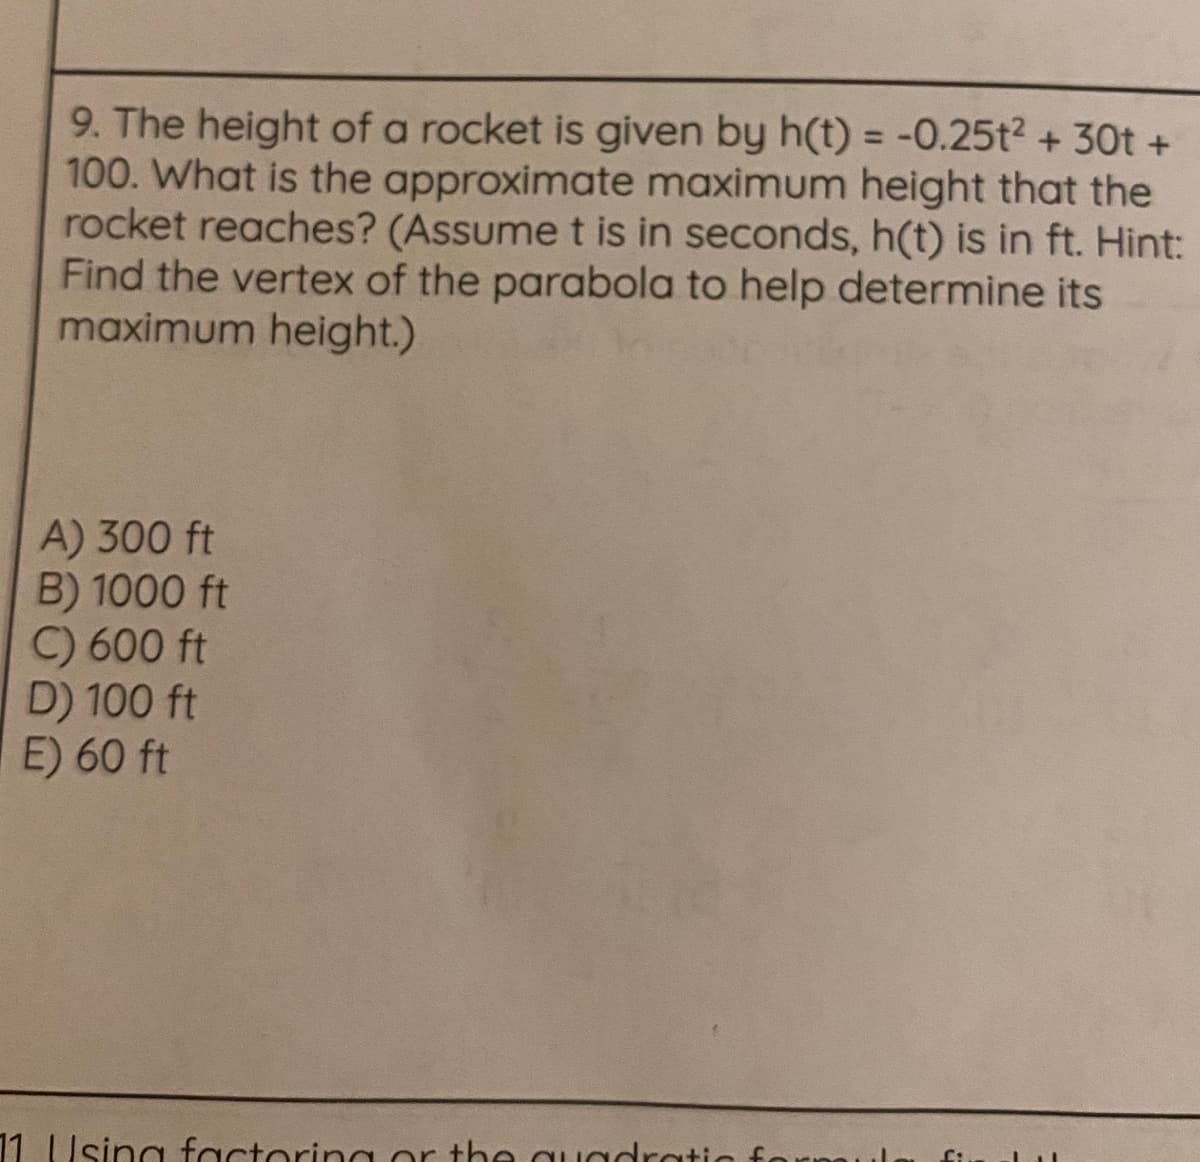 9. The height of a rocket is given by h(t) = -0.25t2 + 30t +
100. What is the approximate maximum height that the
rocket reaches? (Assumet is in seconds, h(t) is in ft. Hint:
Find the vertex of the parabola to help determine its
maximum height.)
%3D
A) 300 ft
B) 1000 ft
C) 600 ft
D) 100 ft
E) 60 ft
11 Using factoring or the quadrati
